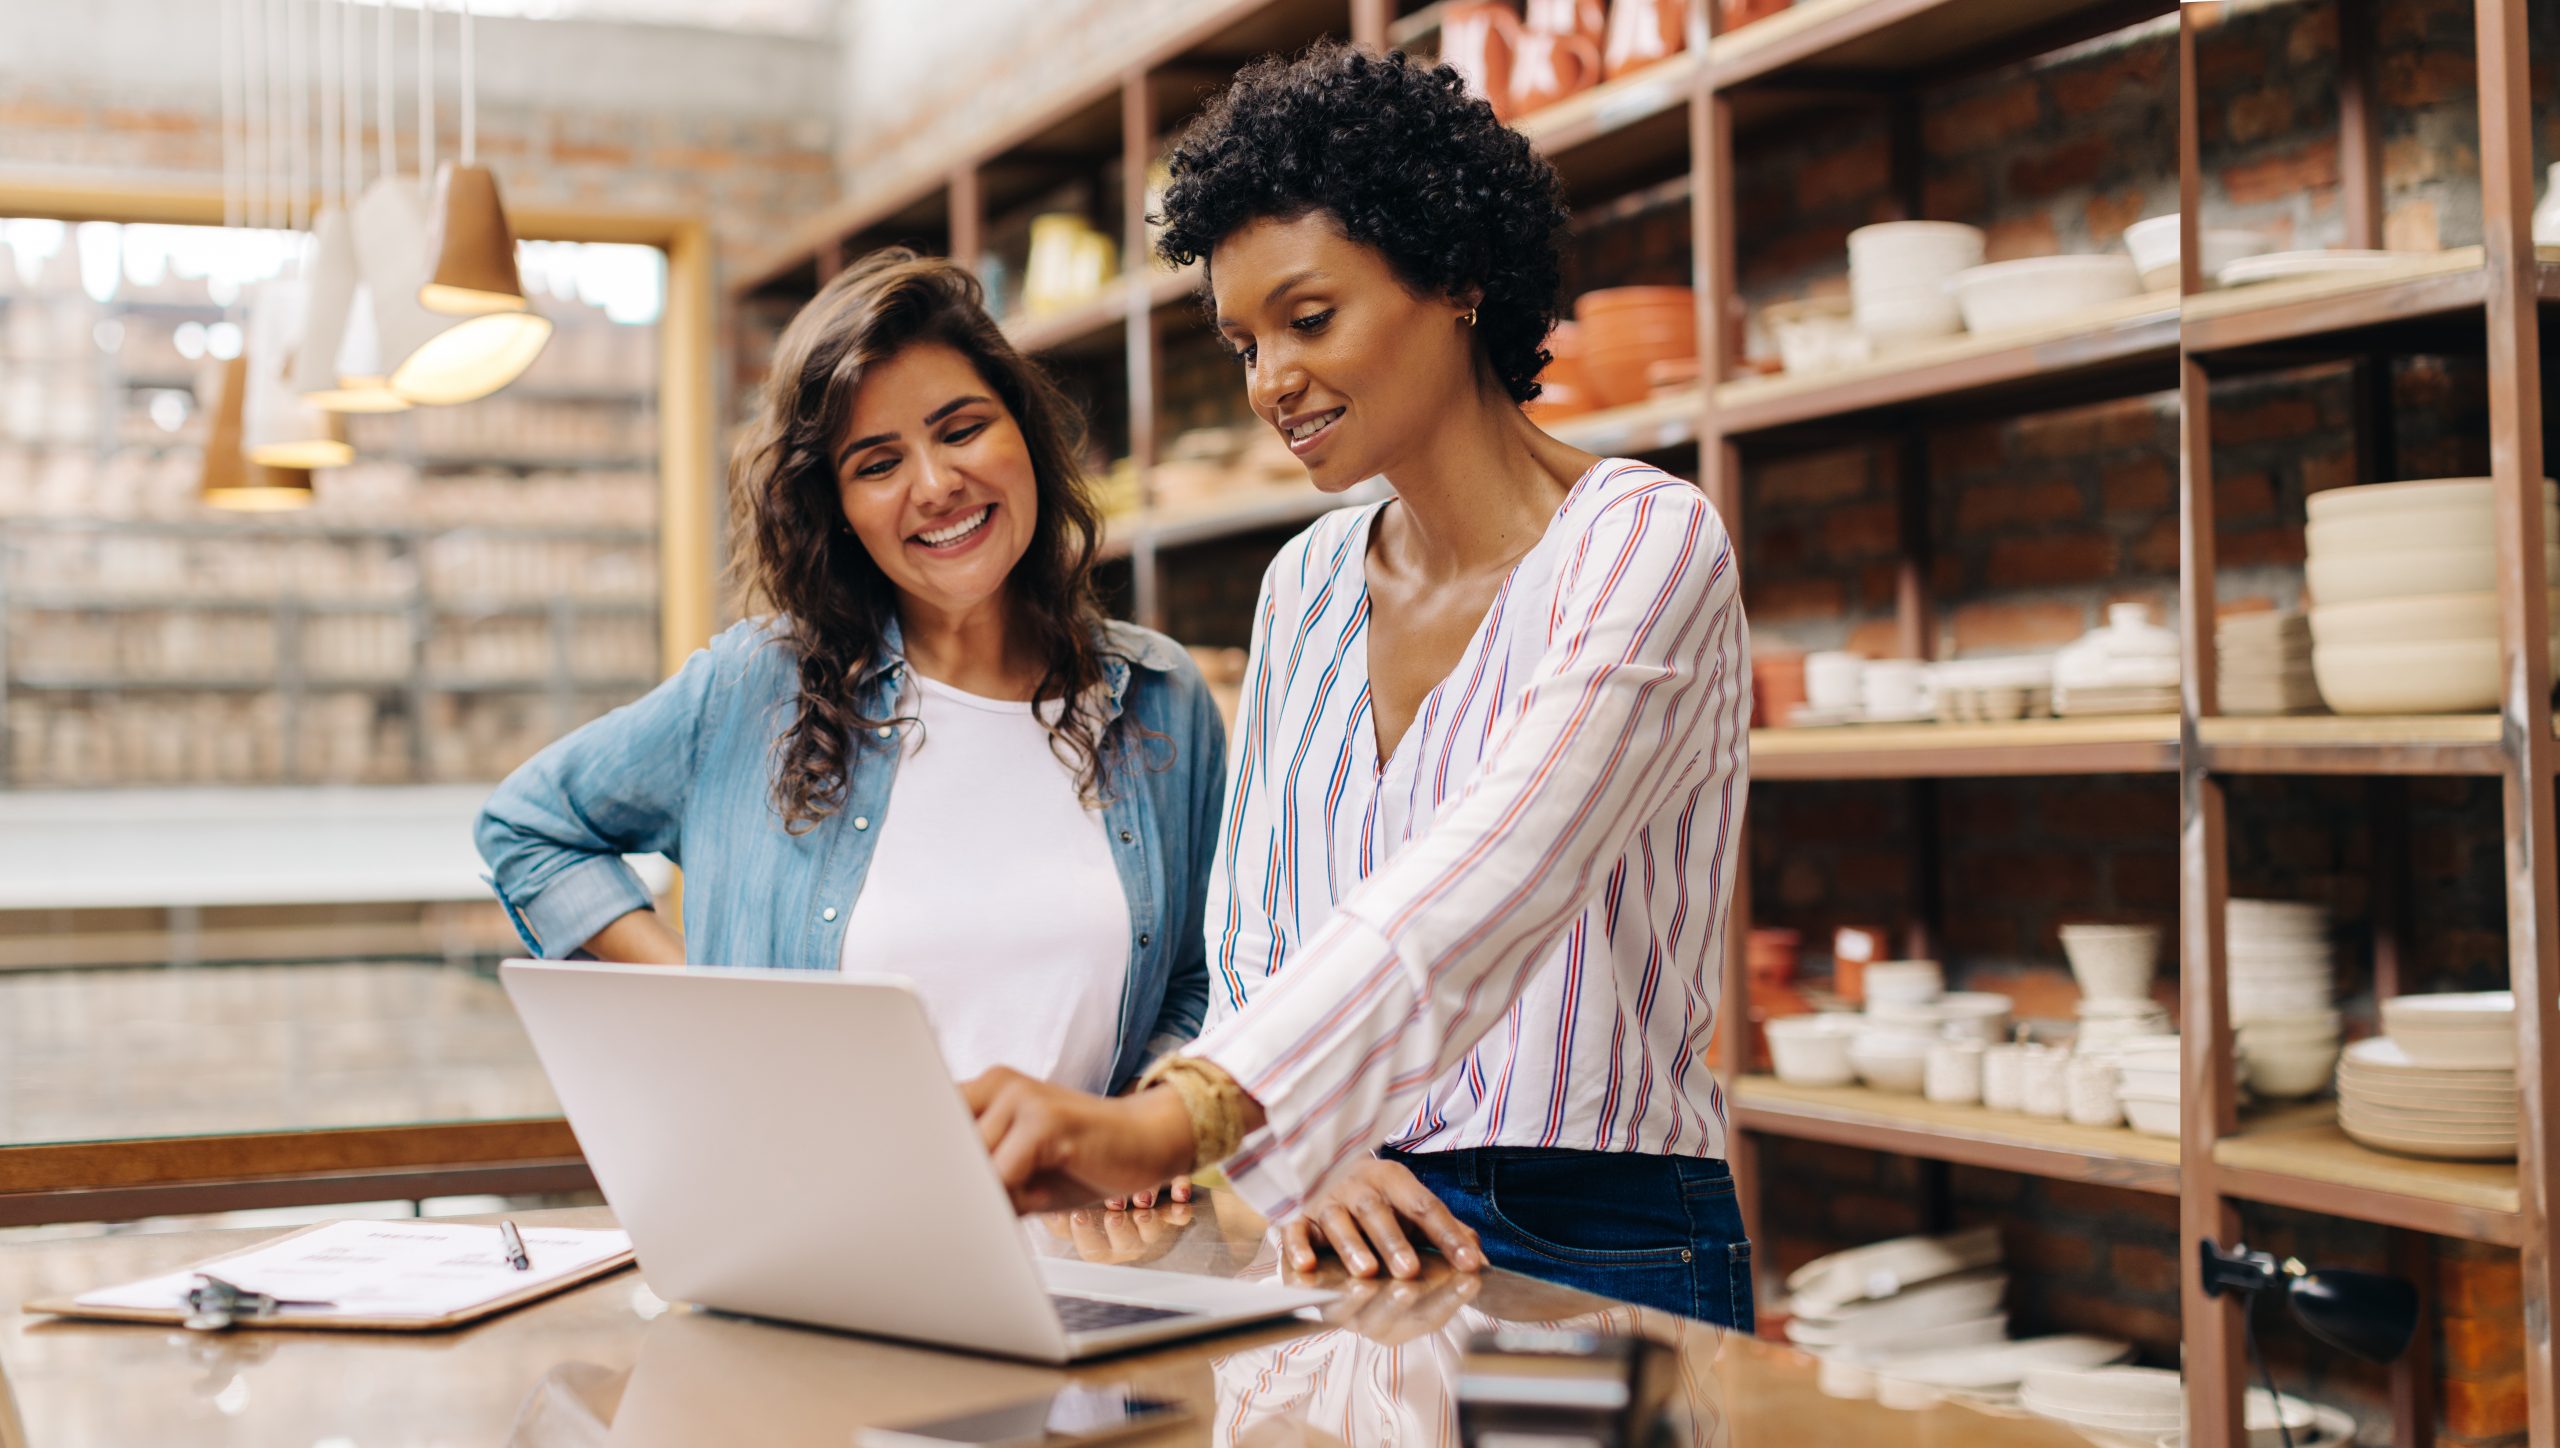 SBA Administrator Isabel Guzman released new data revealing an increase in SBA-backed loans to women-owned businesses.